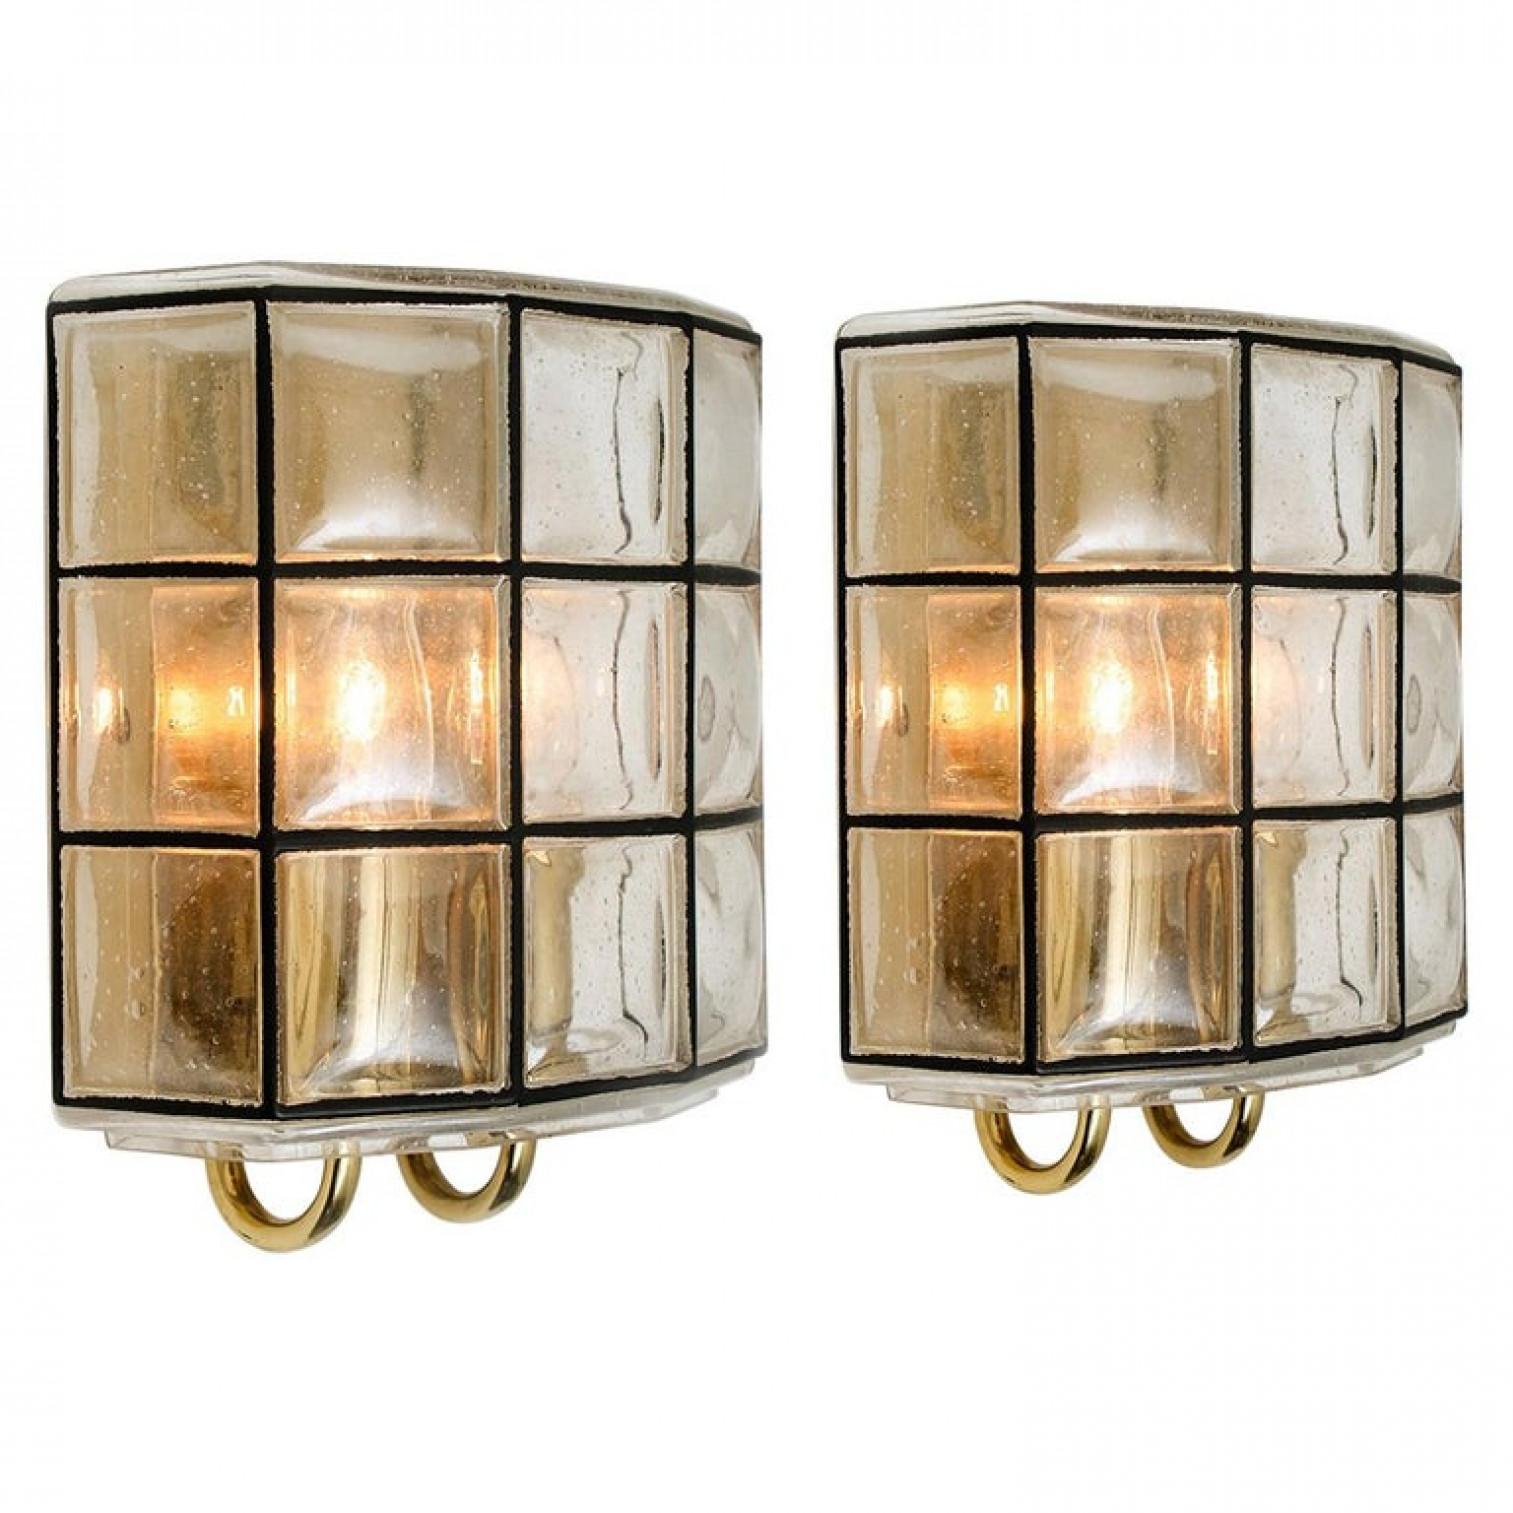 Mid-Century Modern 1 of the 4 of Iron and Bubble Glass Sconces Wall Lamps by Limburg Germany, 1960 For Sale